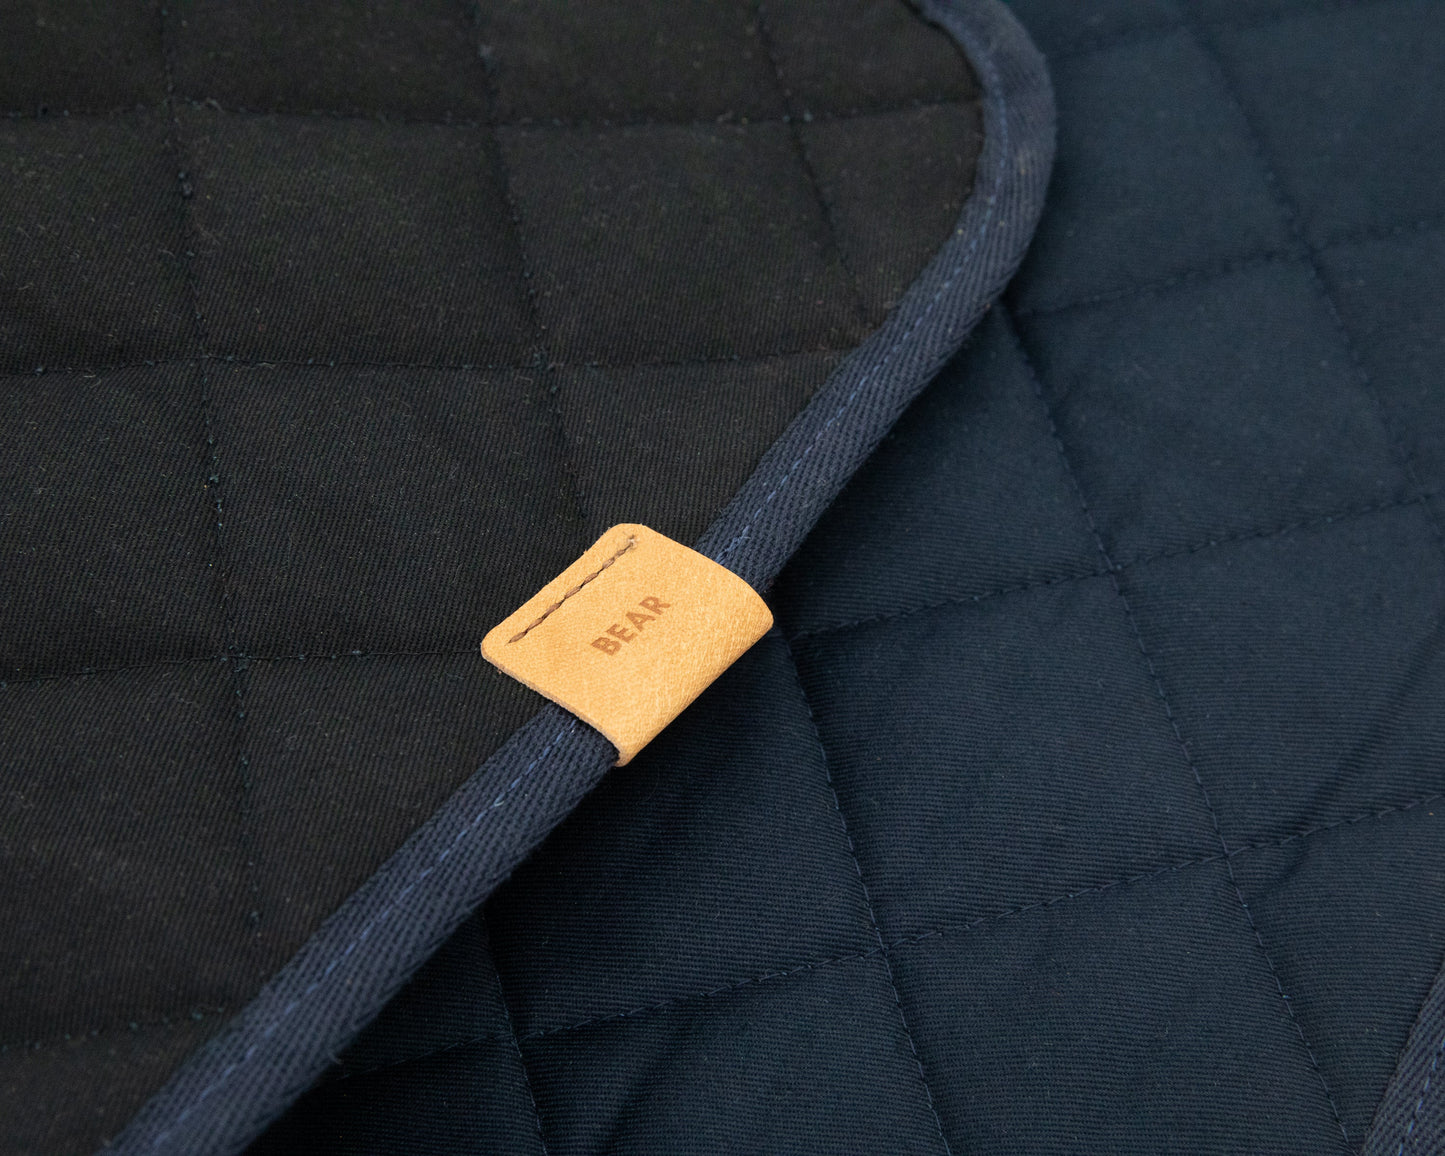 Quilted canvas dog mat / bed - Kohutt™ | Enduring Handcrafted Goods